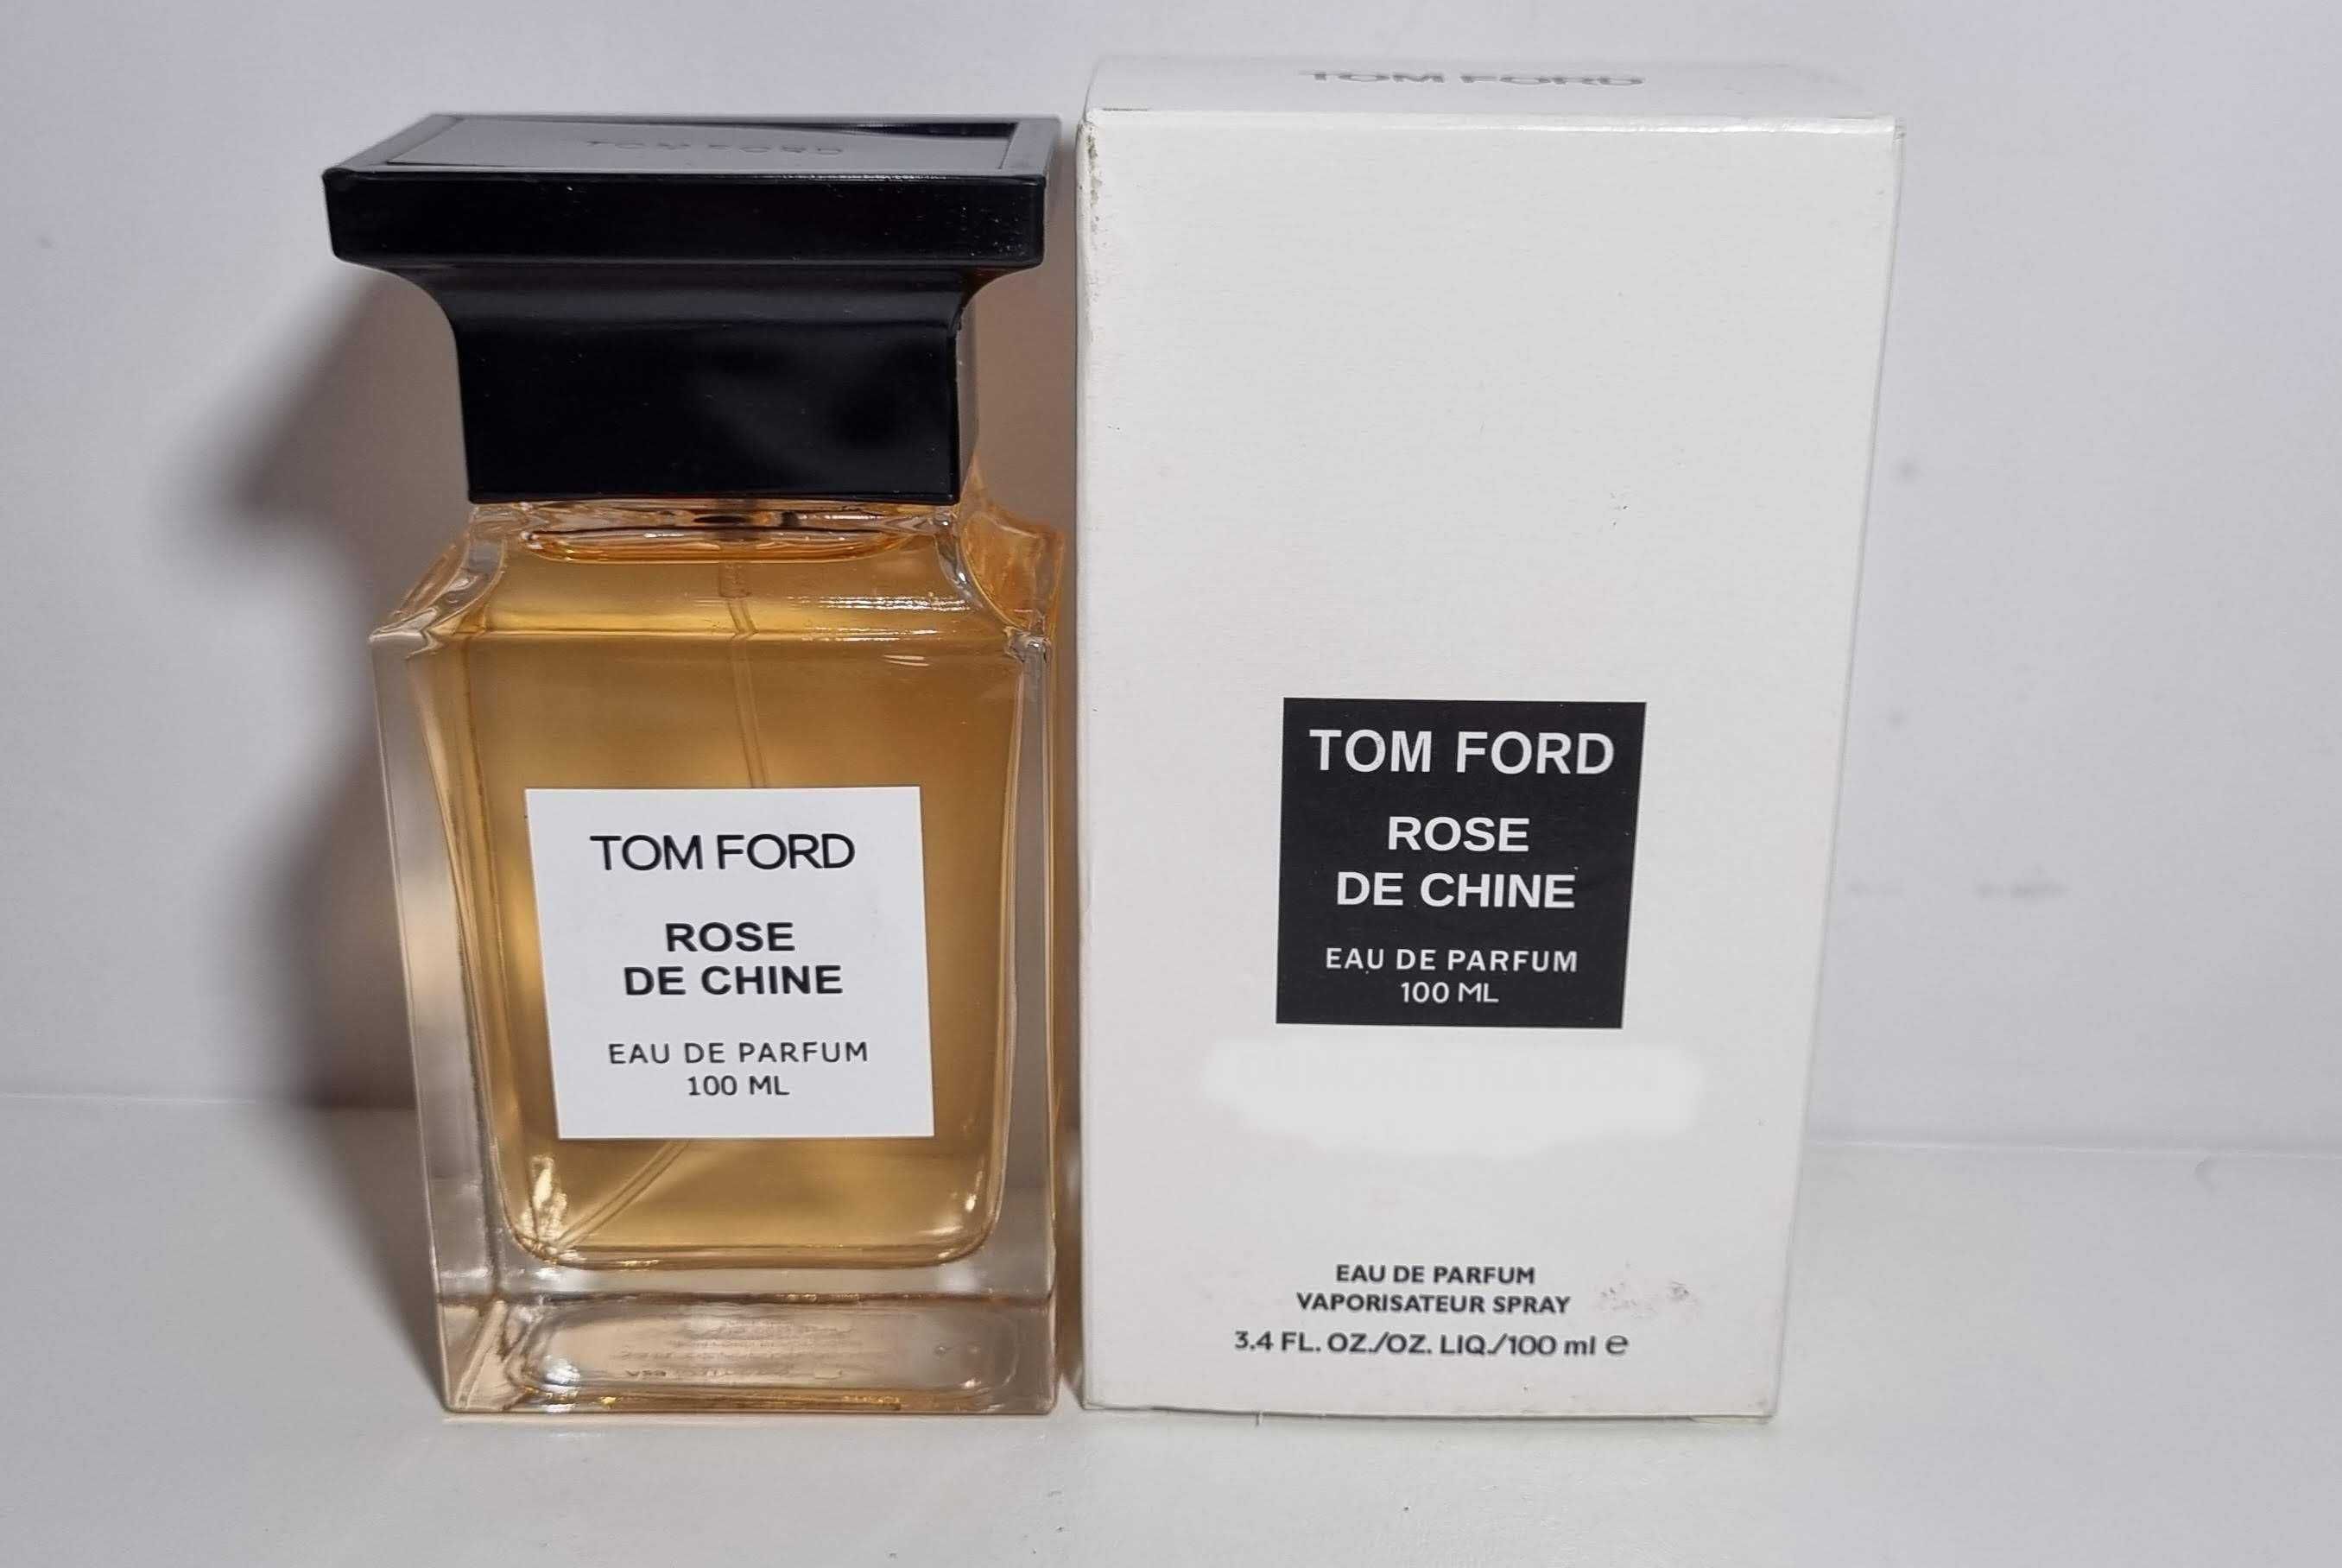 Parfum Tom Ford - Ombre Leather, London, Musk Pure, Jasmine Musk, EDP